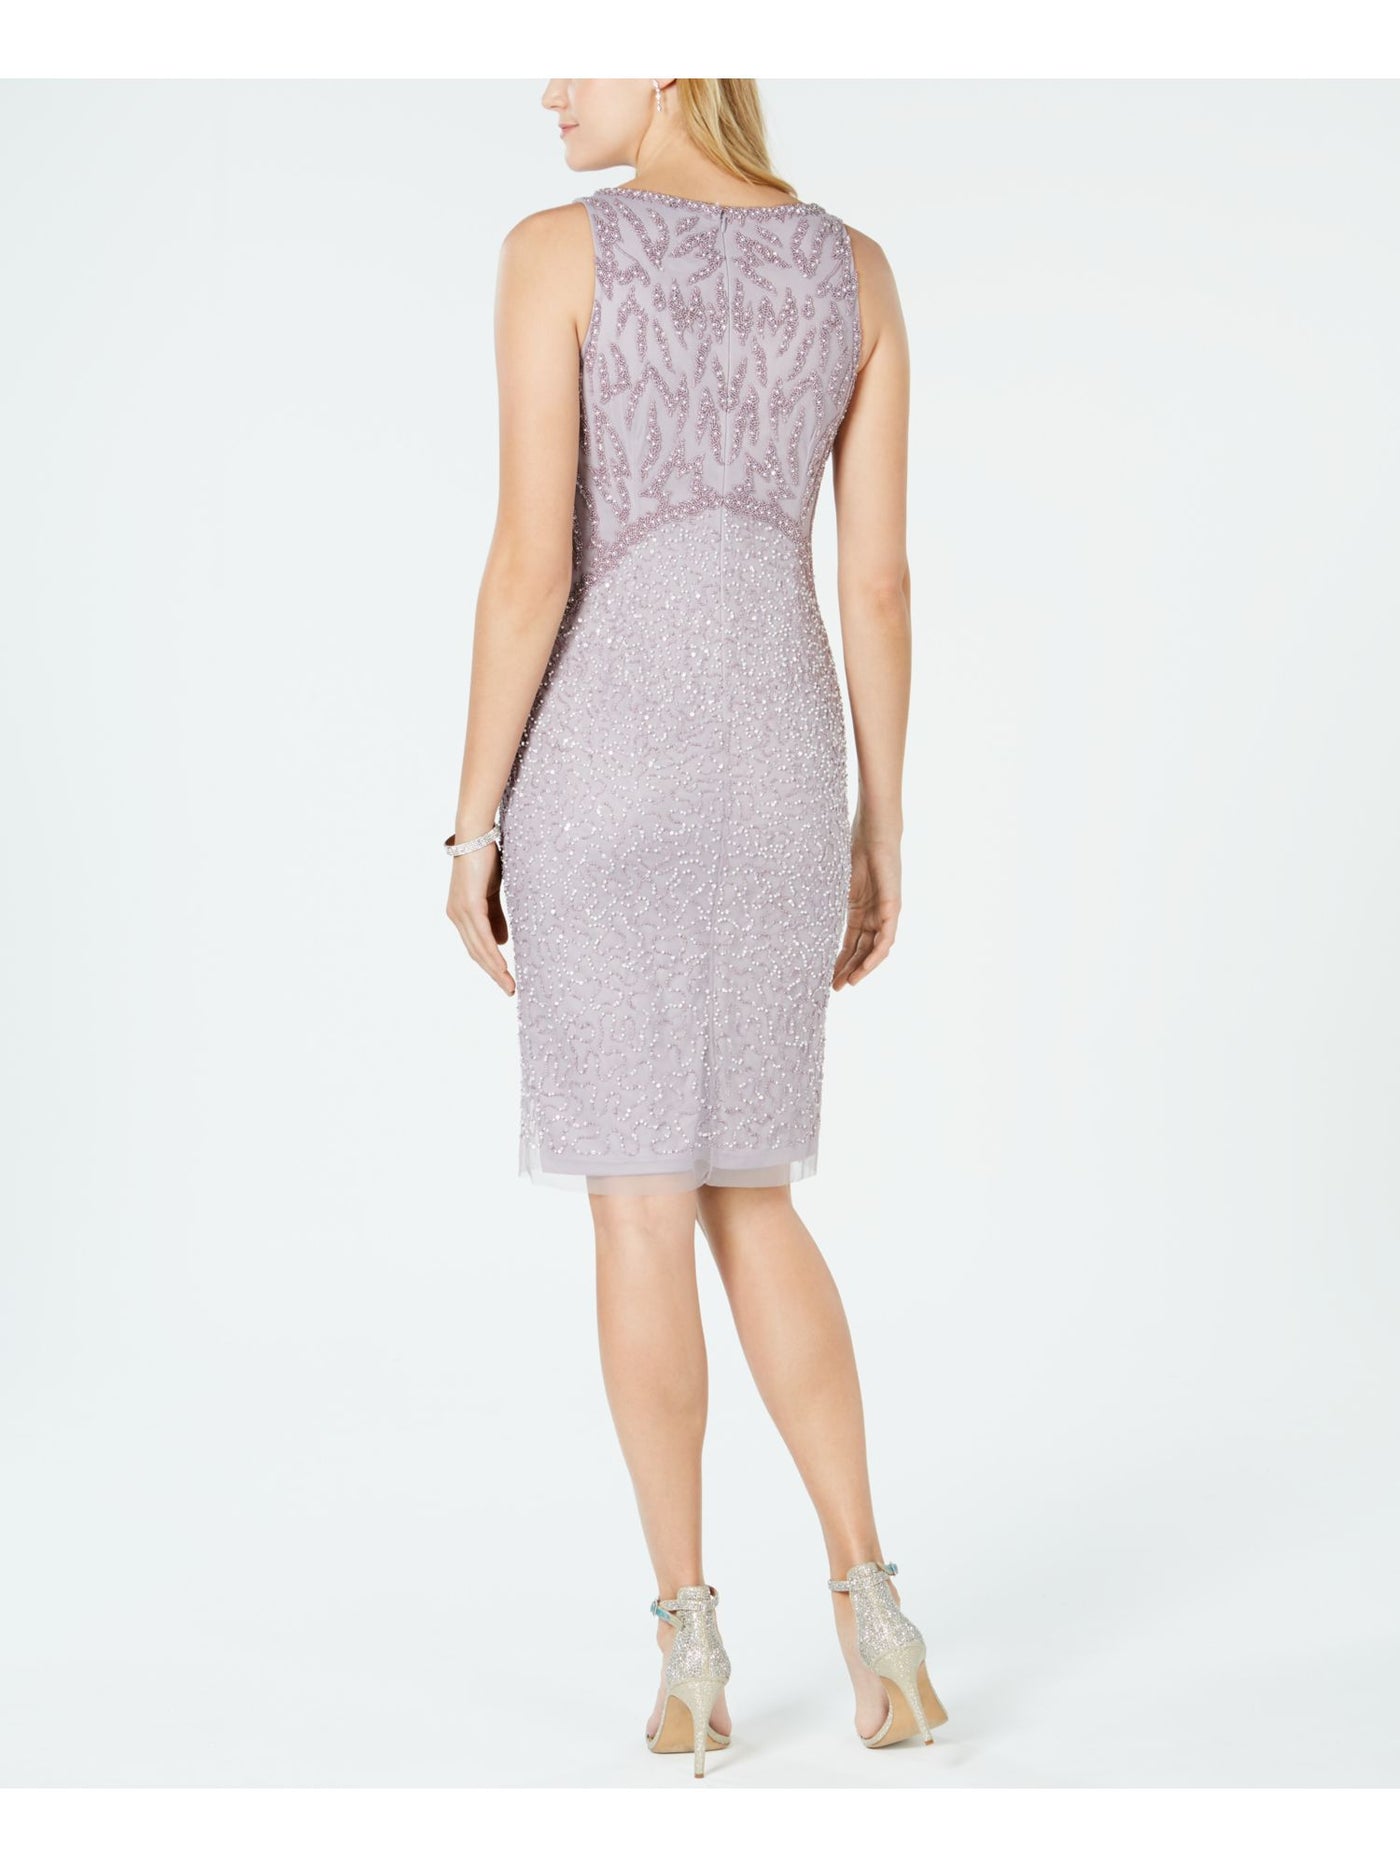 ADRIANNA PAPELL Womens Beaded Sequined Sleeveless V Neck Above The Knee Cocktail Sheath Dress